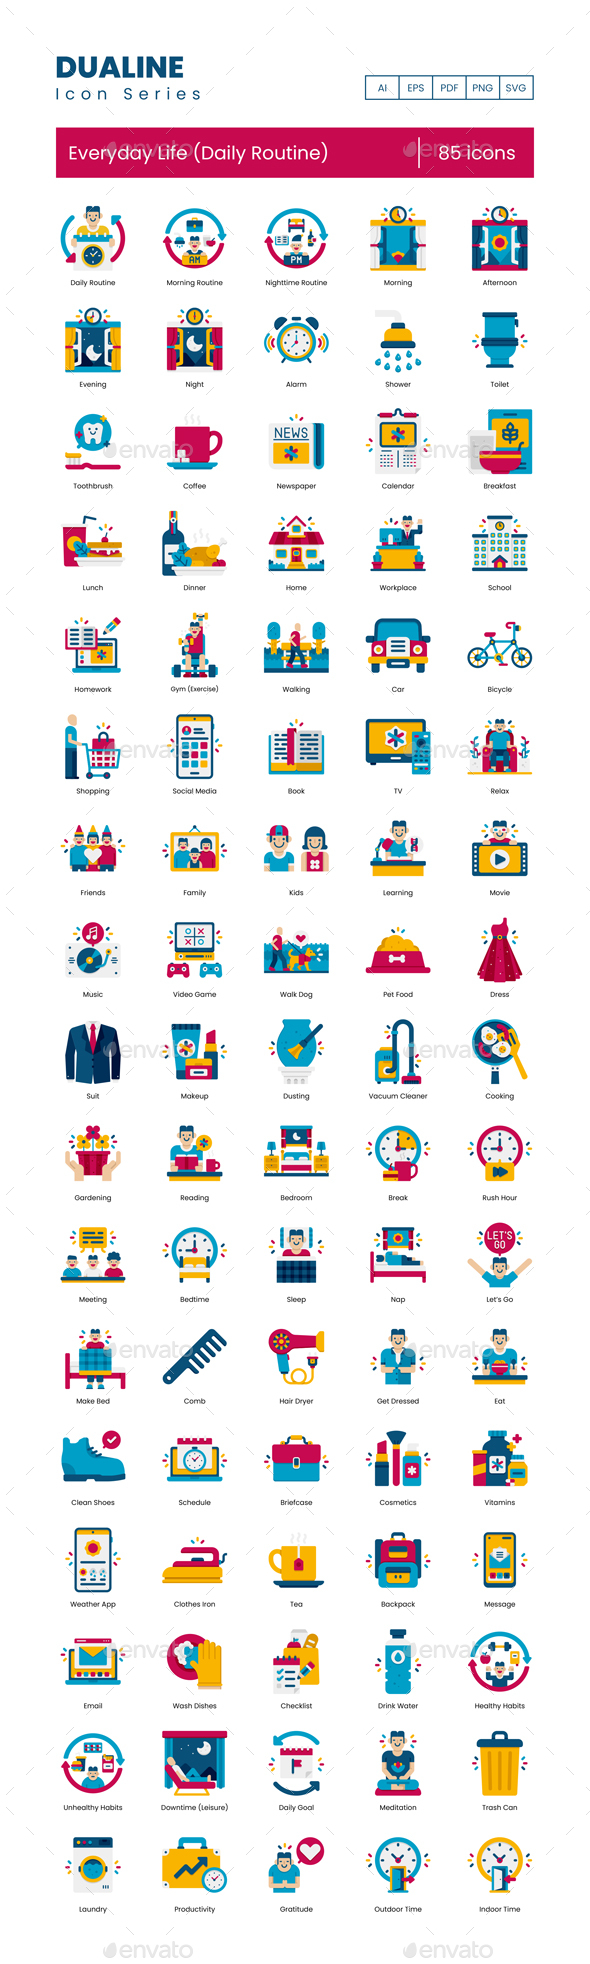 85 Everyday Life (Daily Routine) Icons | Flat Dualine Series